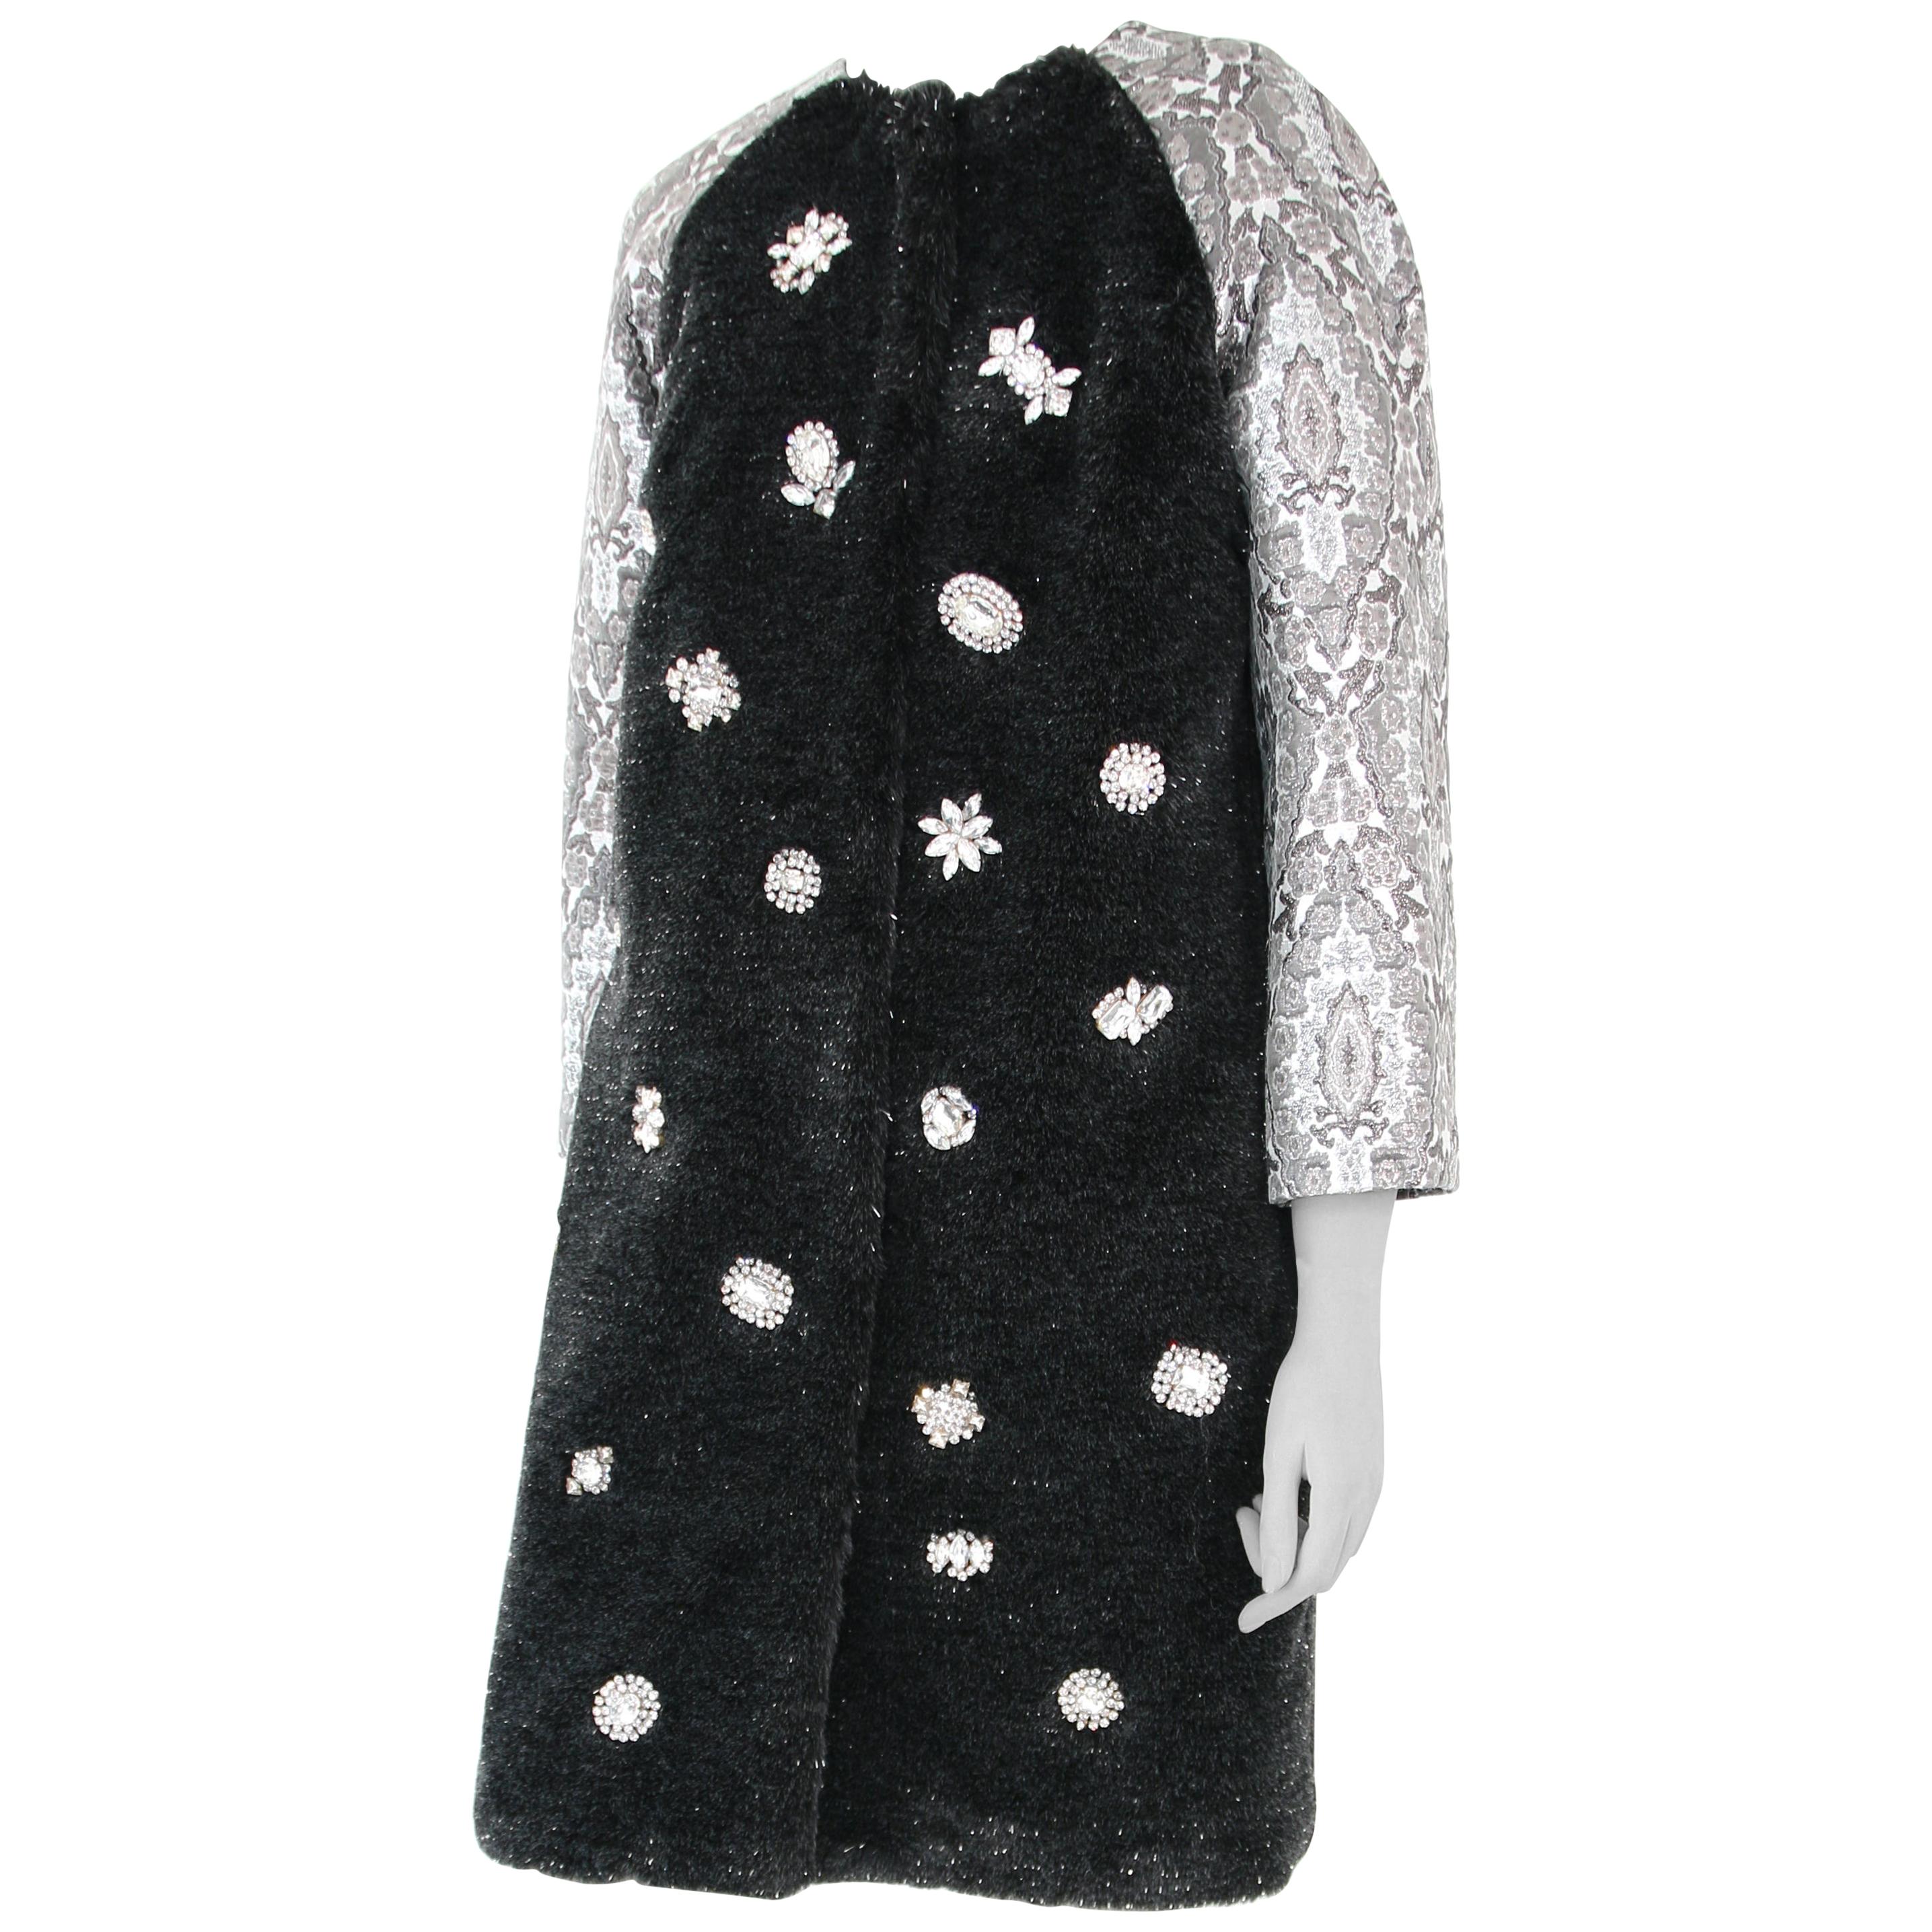 Pelush Black Faux Fur Mink Coat with Vintage Crystals and Damask Brocade - XS